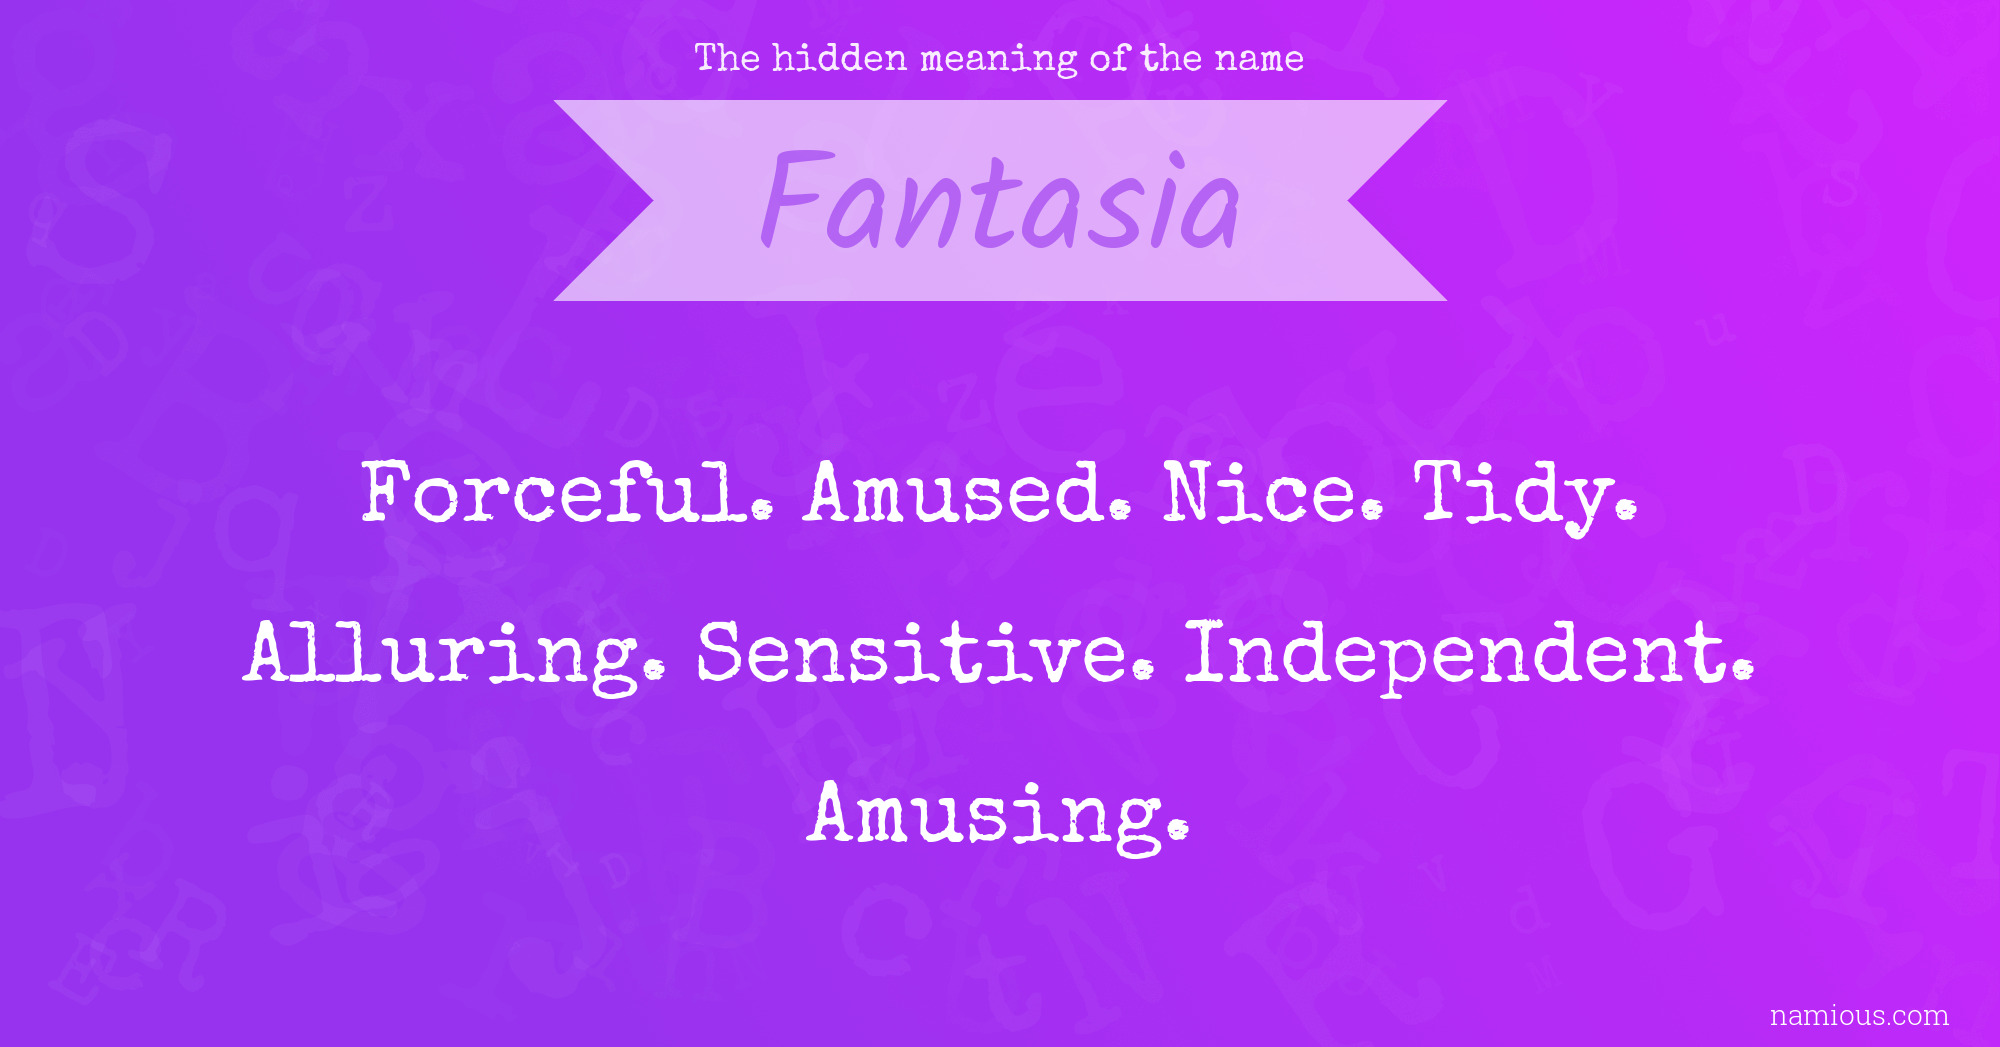 The hidden meaning of the name Fantasia